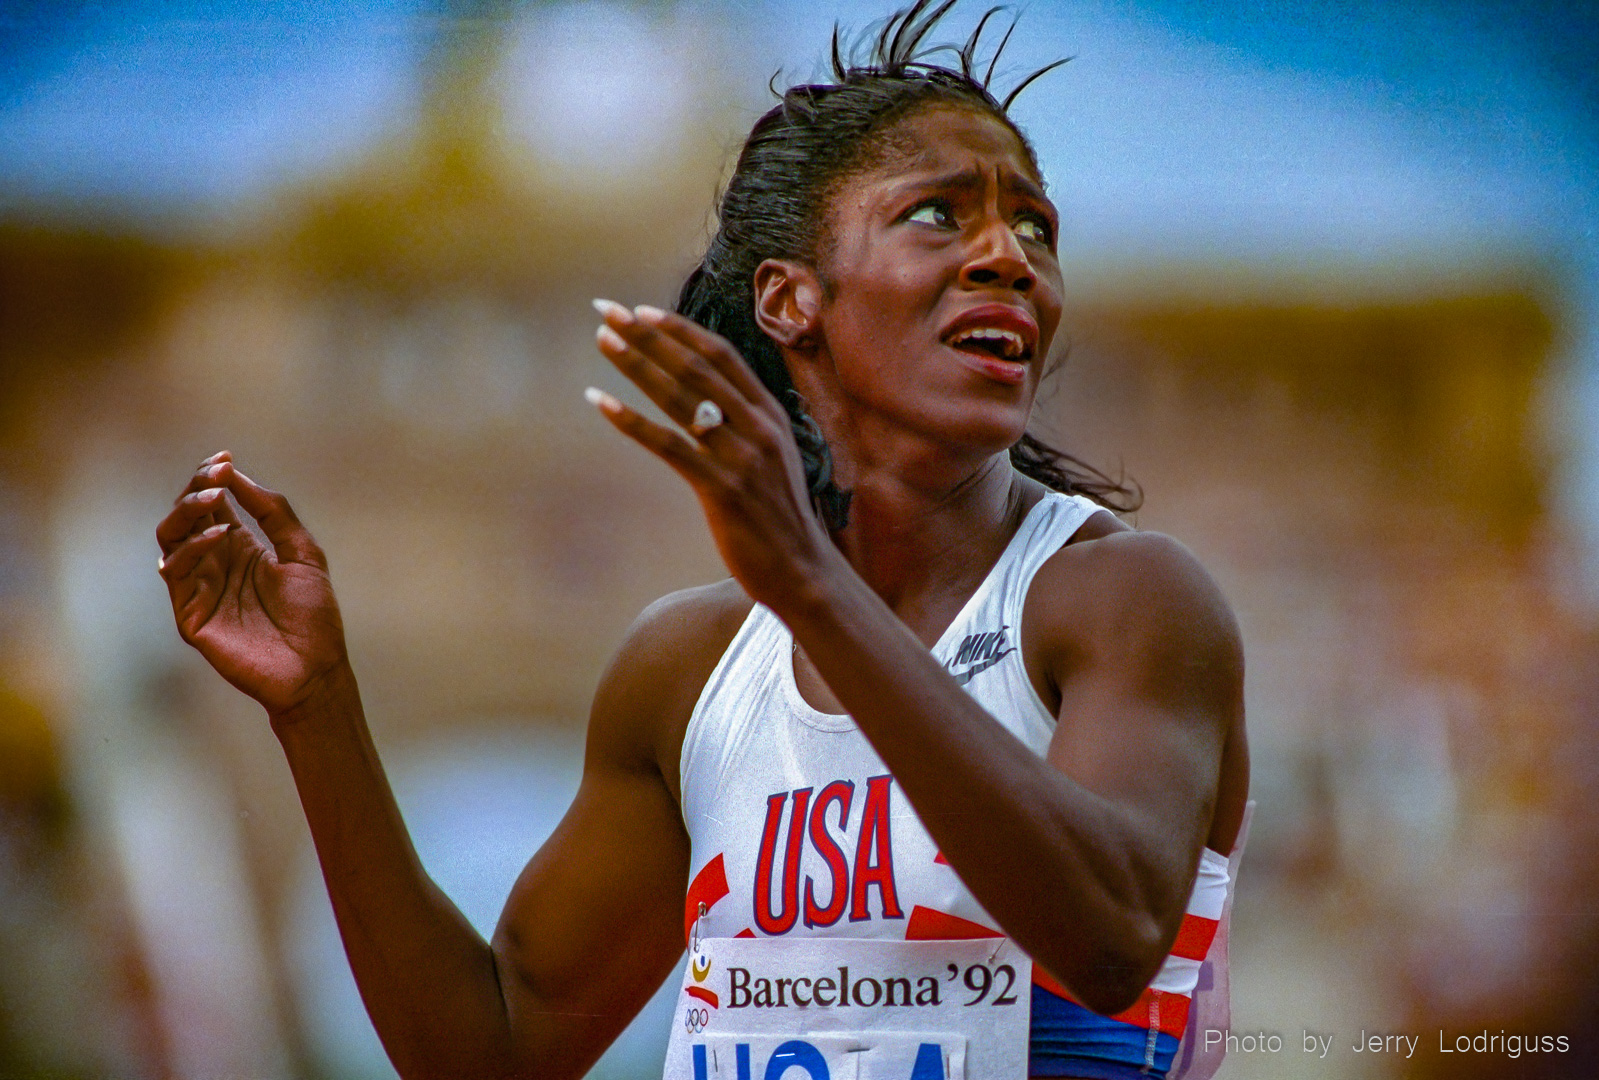 Gwen Torrence reacts as she looks at the scoreboard and sees she has won a gold medal in the women's 200 meters with a time of 21.81 seconds at the 1992 Barcelona Olympics.